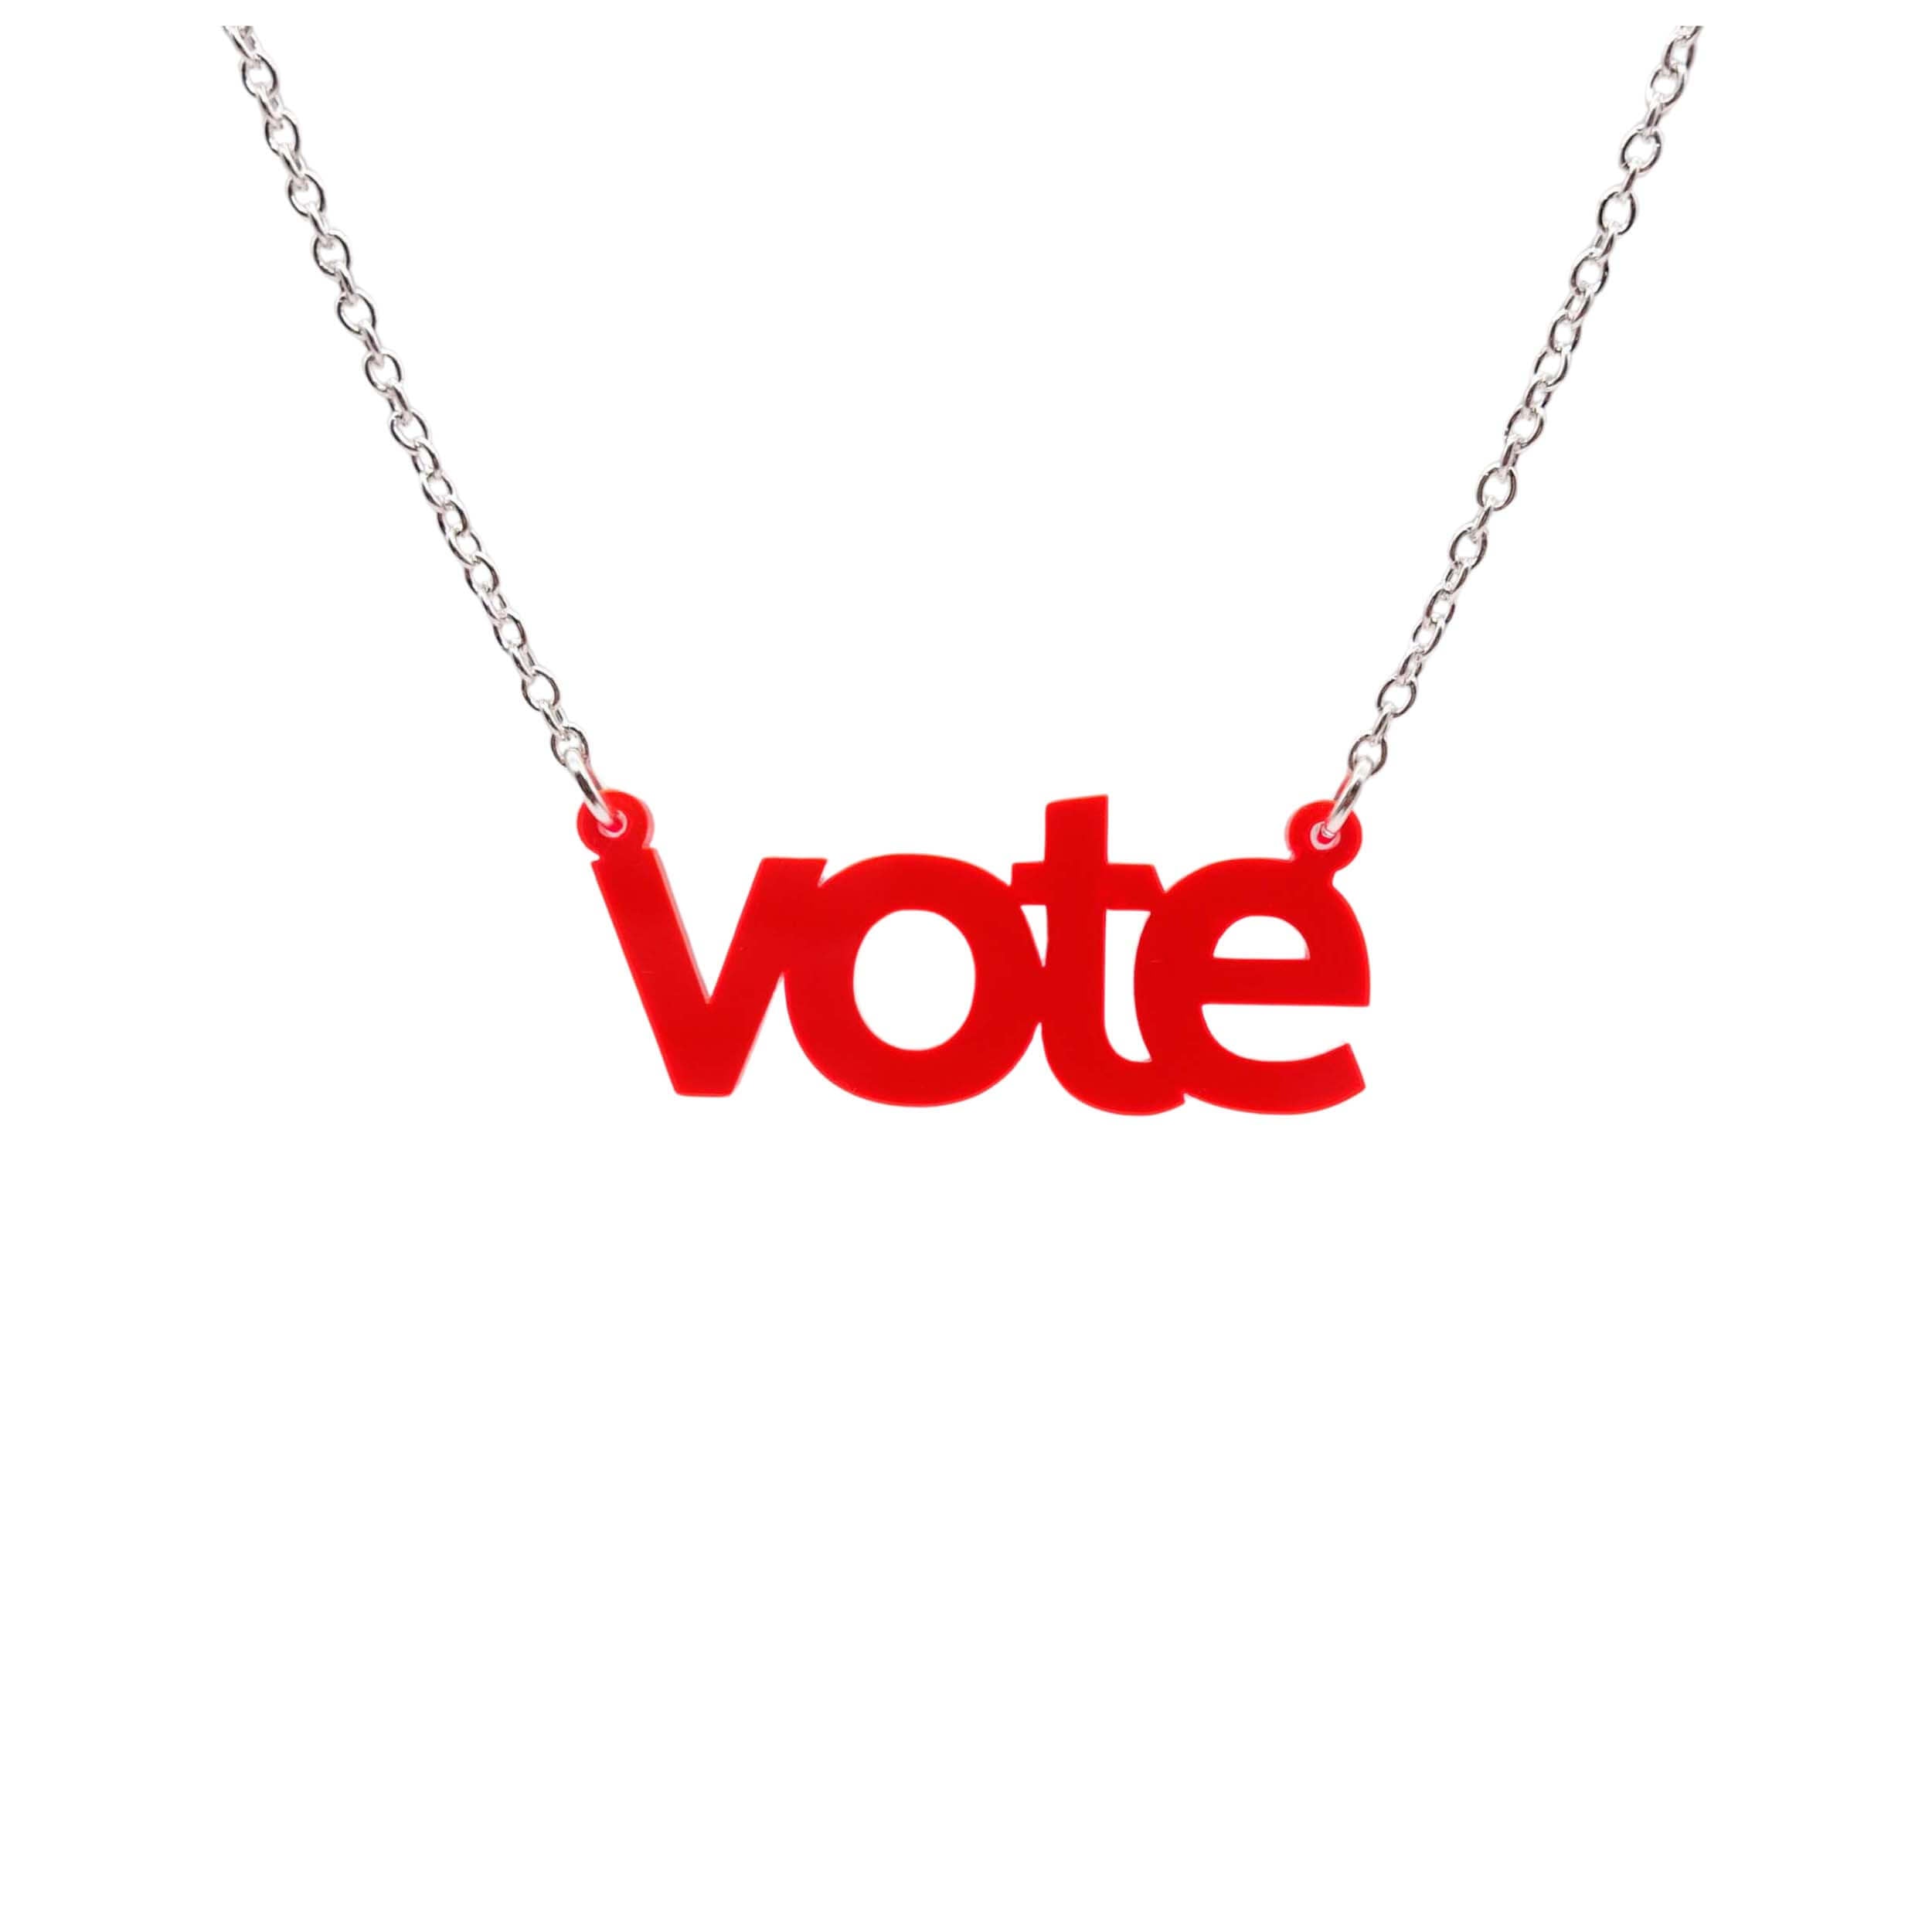 Vote necklace in hot red shown hanging against a white background. 